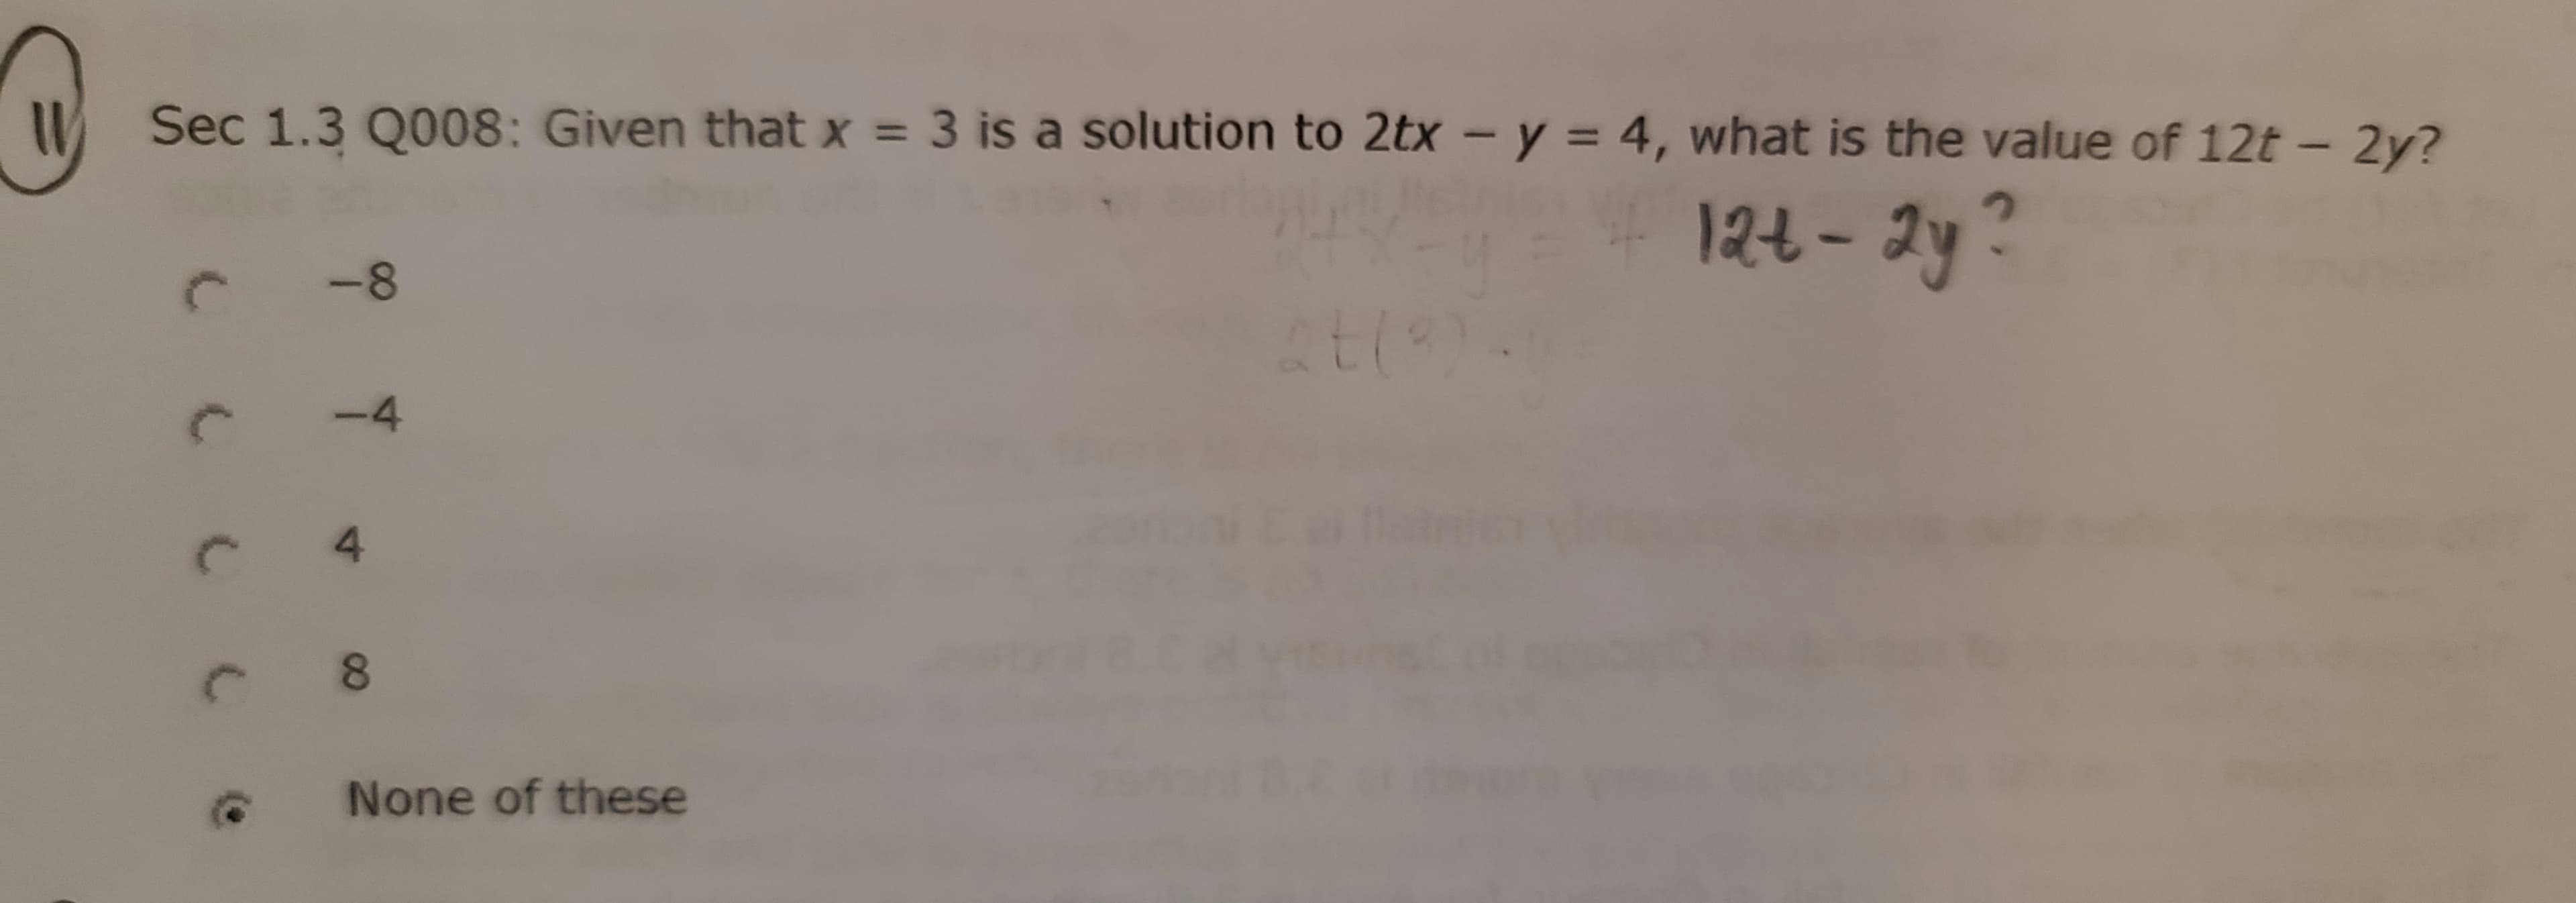 Given that x = 3 is a solution to 2tx - y = 4, what is the value of 12t - 2y?
